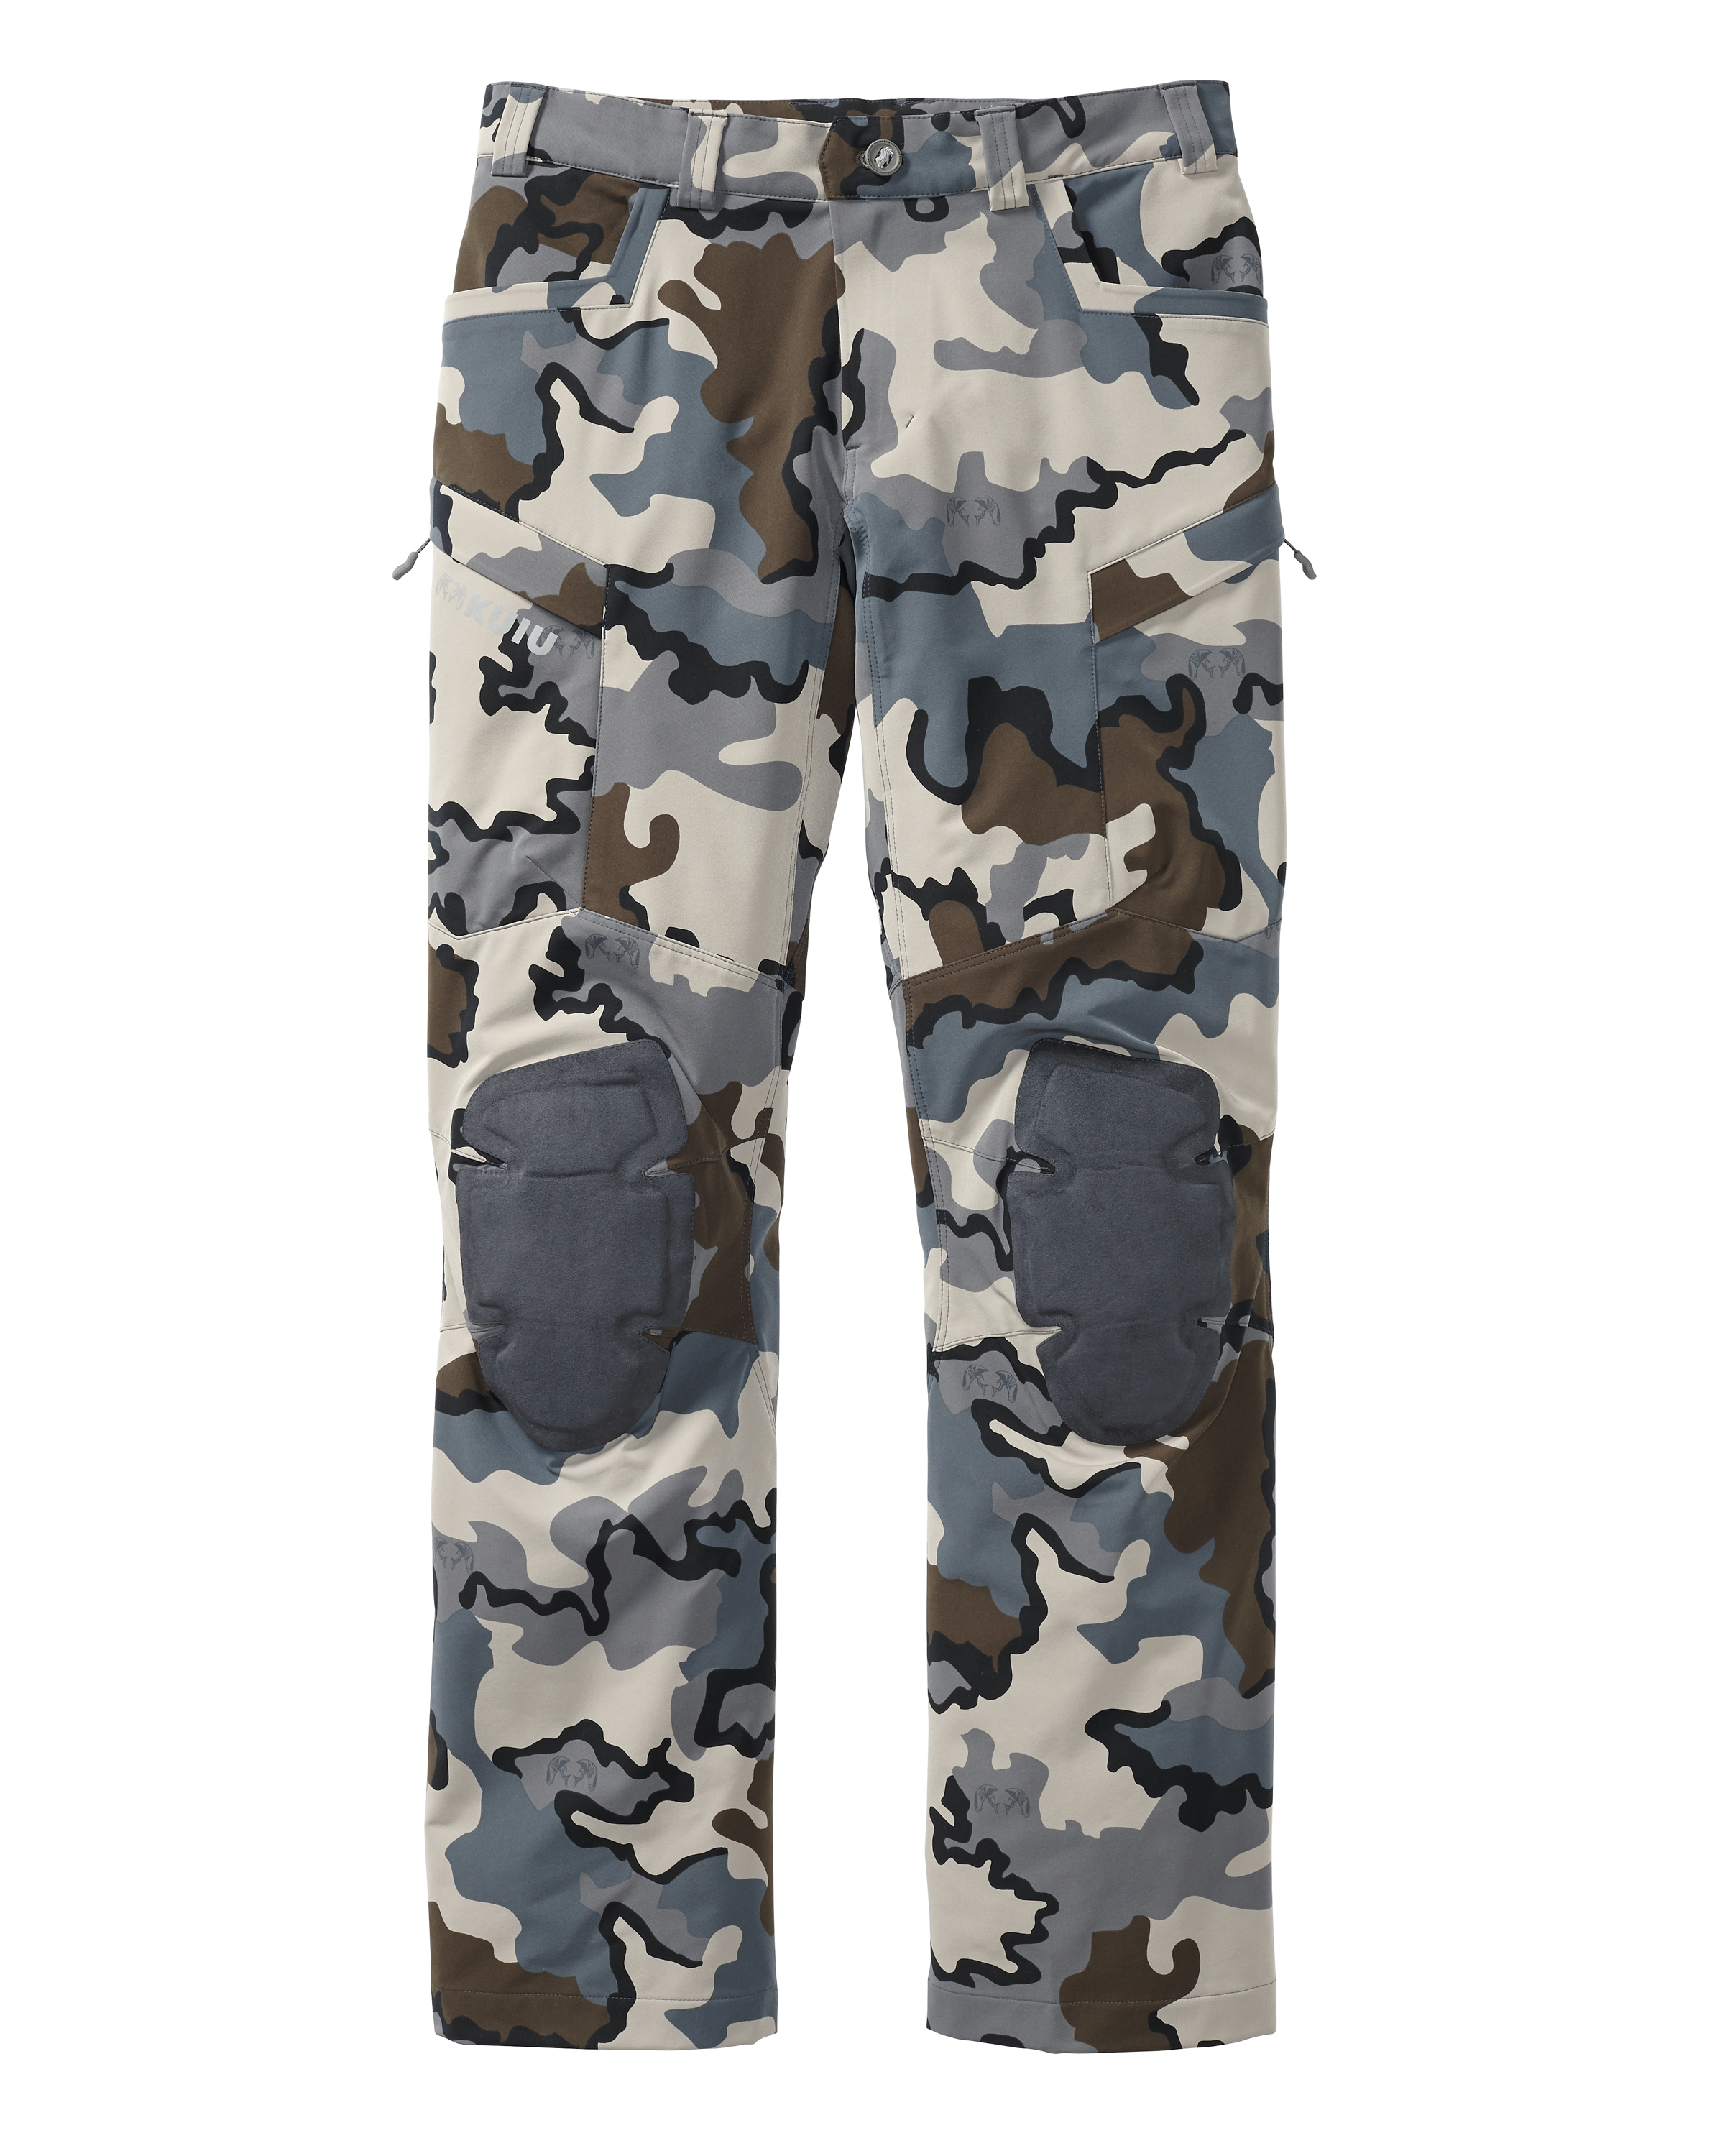 KUIU PRO Hunting Pant in Vias | Size 30